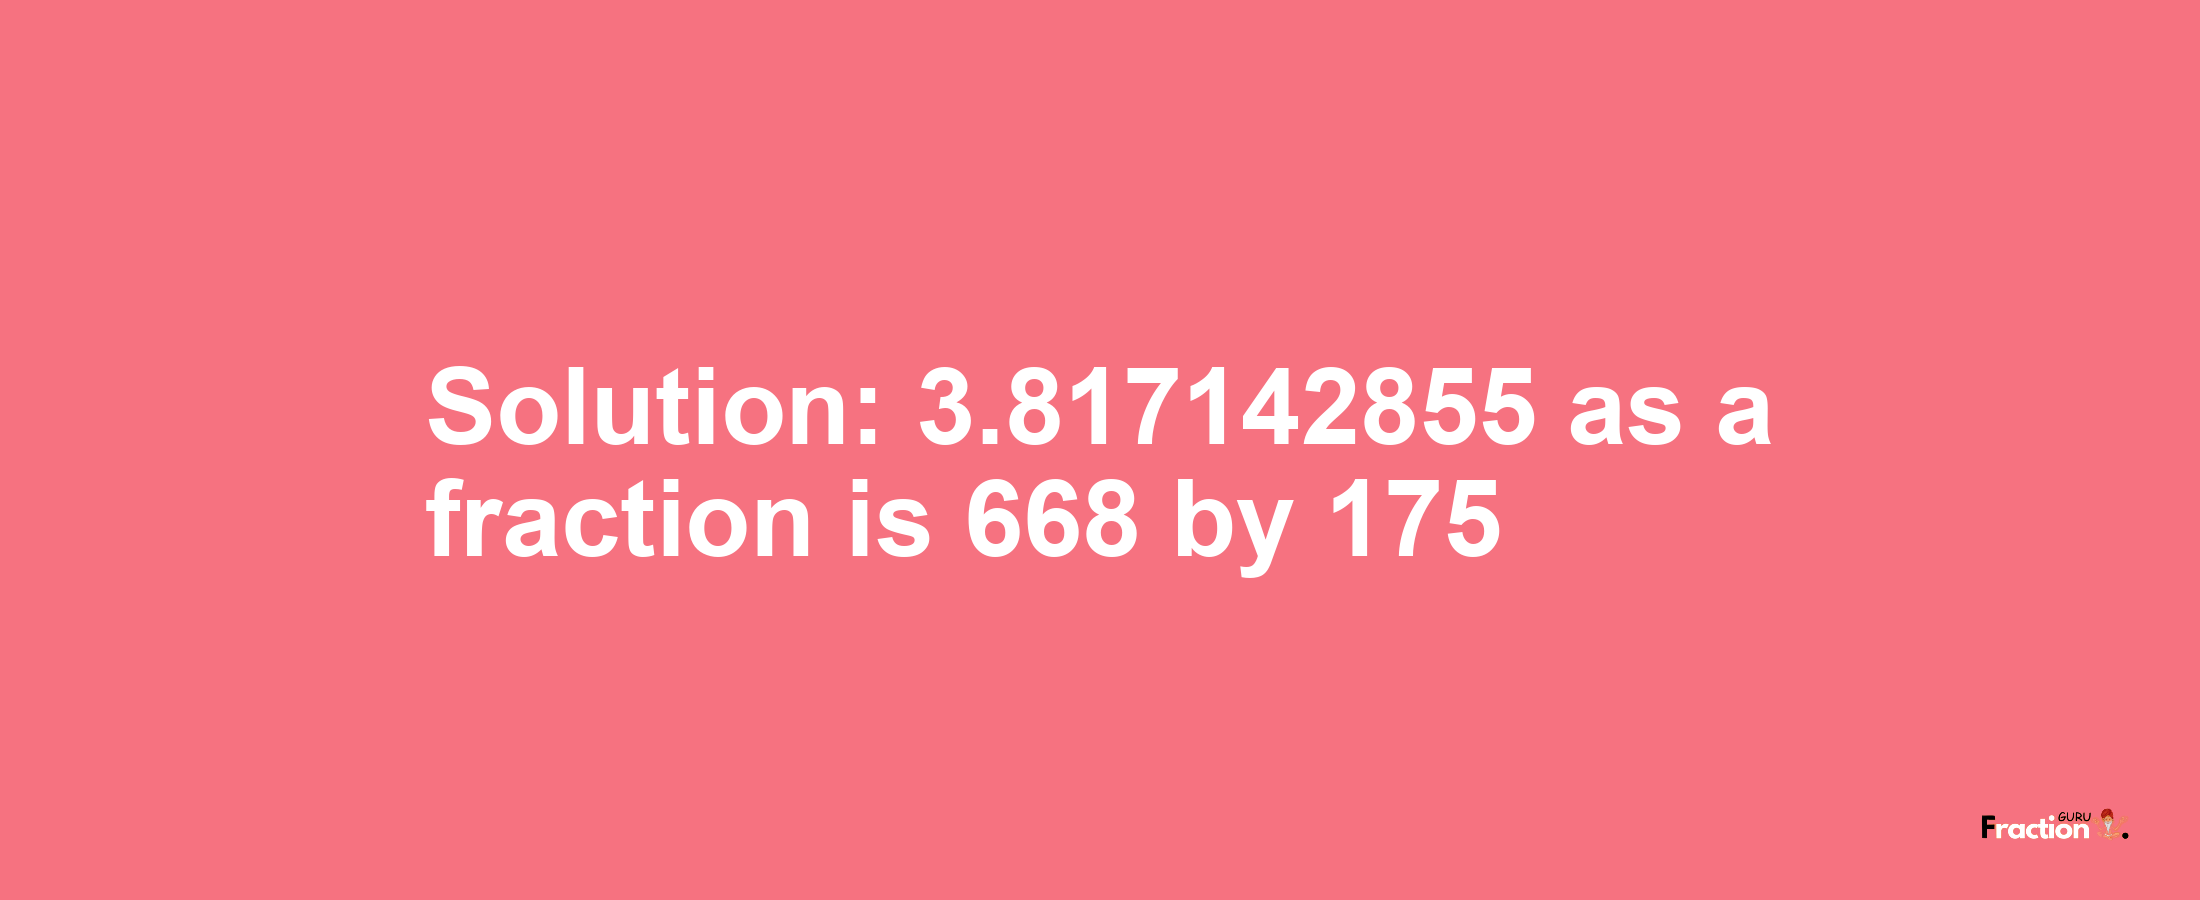 Solution:3.817142855 as a fraction is 668/175